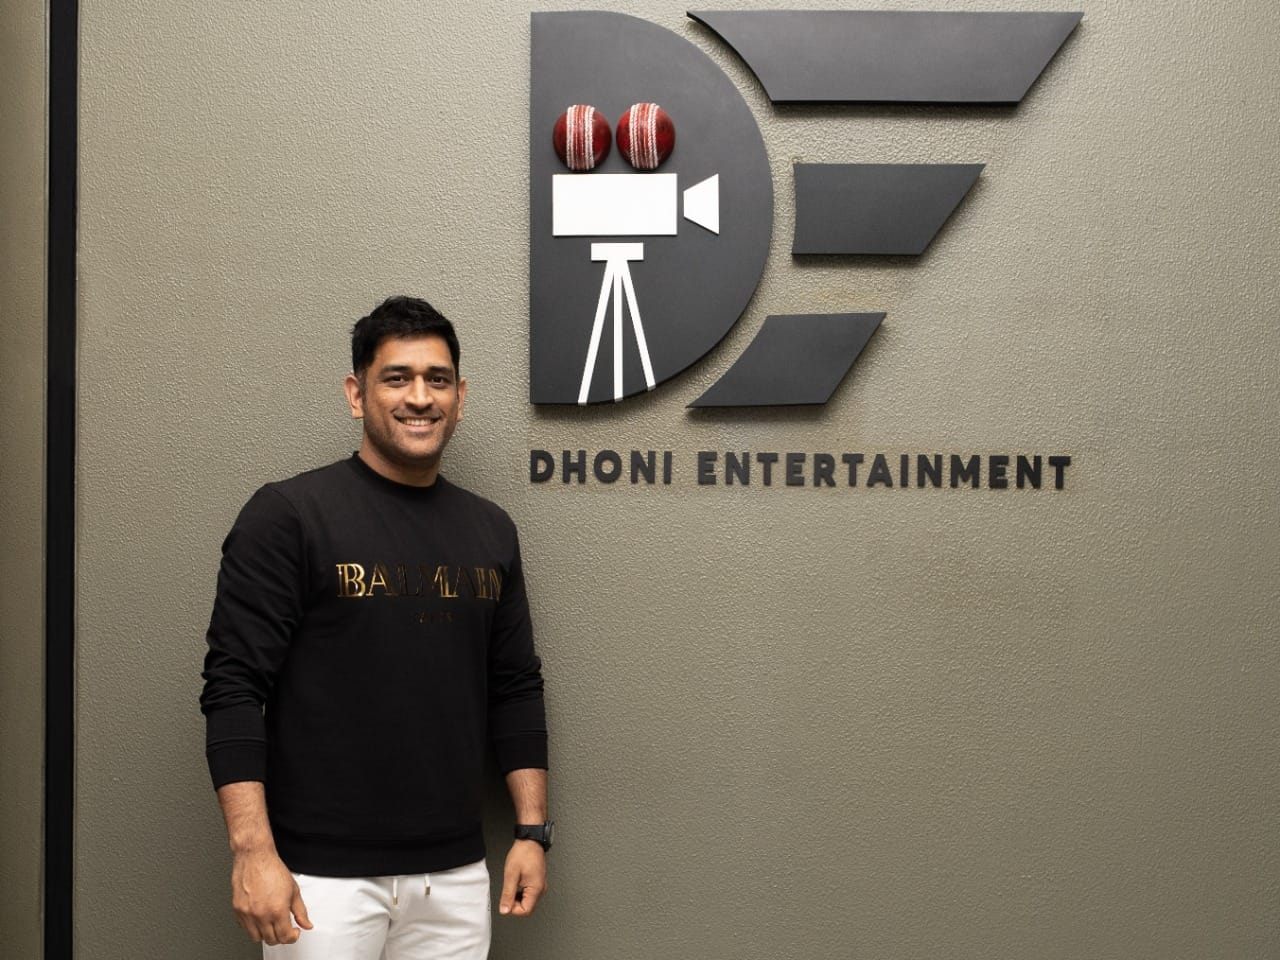 Dhoni Entertainment into film production with a Tamil film